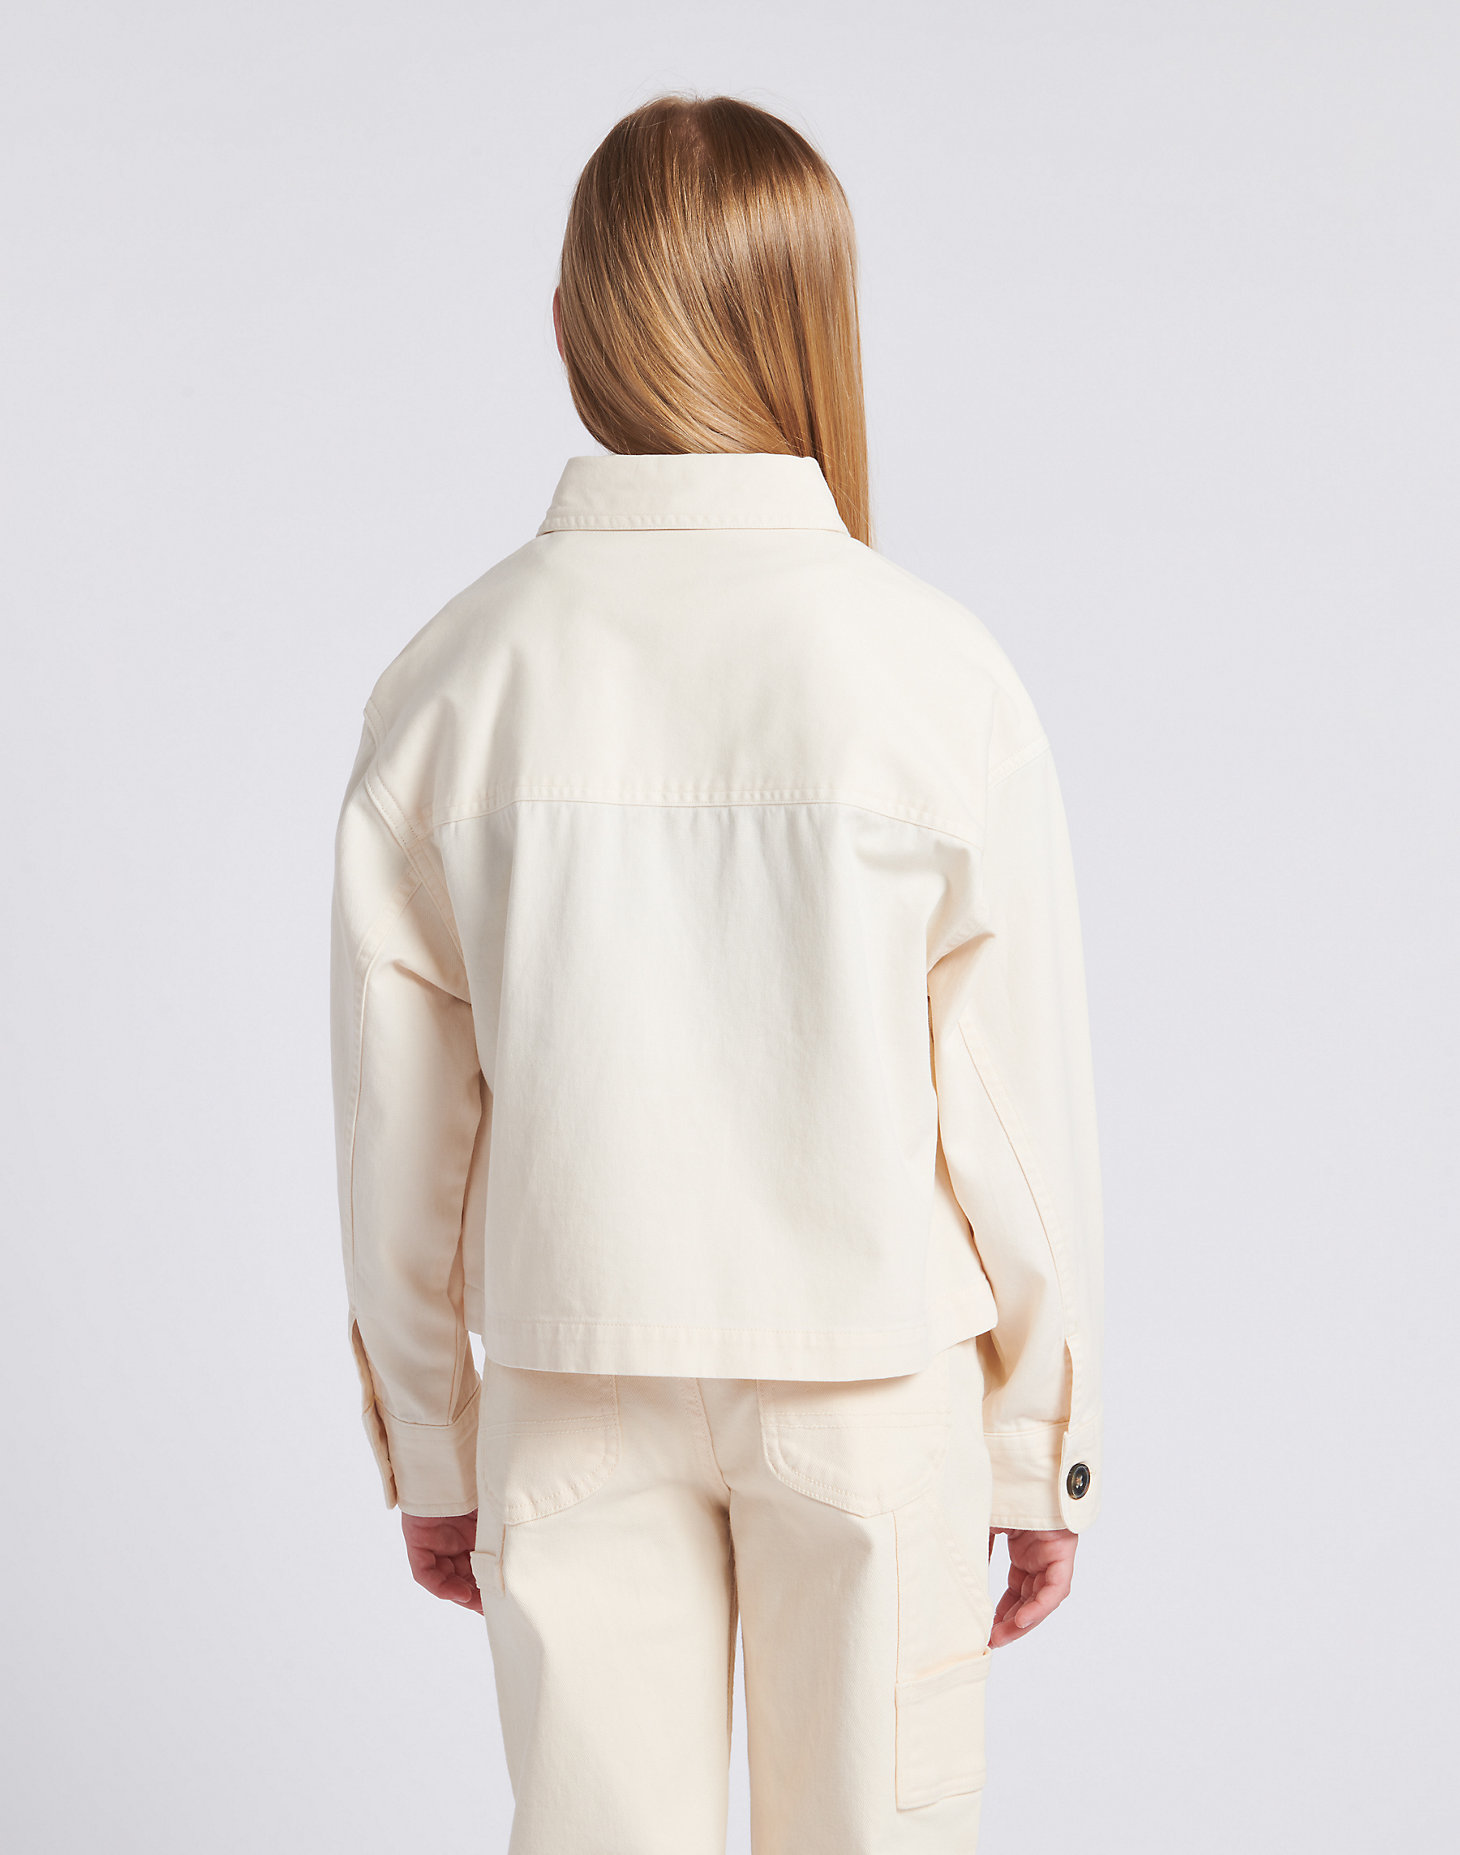 Twill Service Overshirt in Pearled Ivory alternative view 2